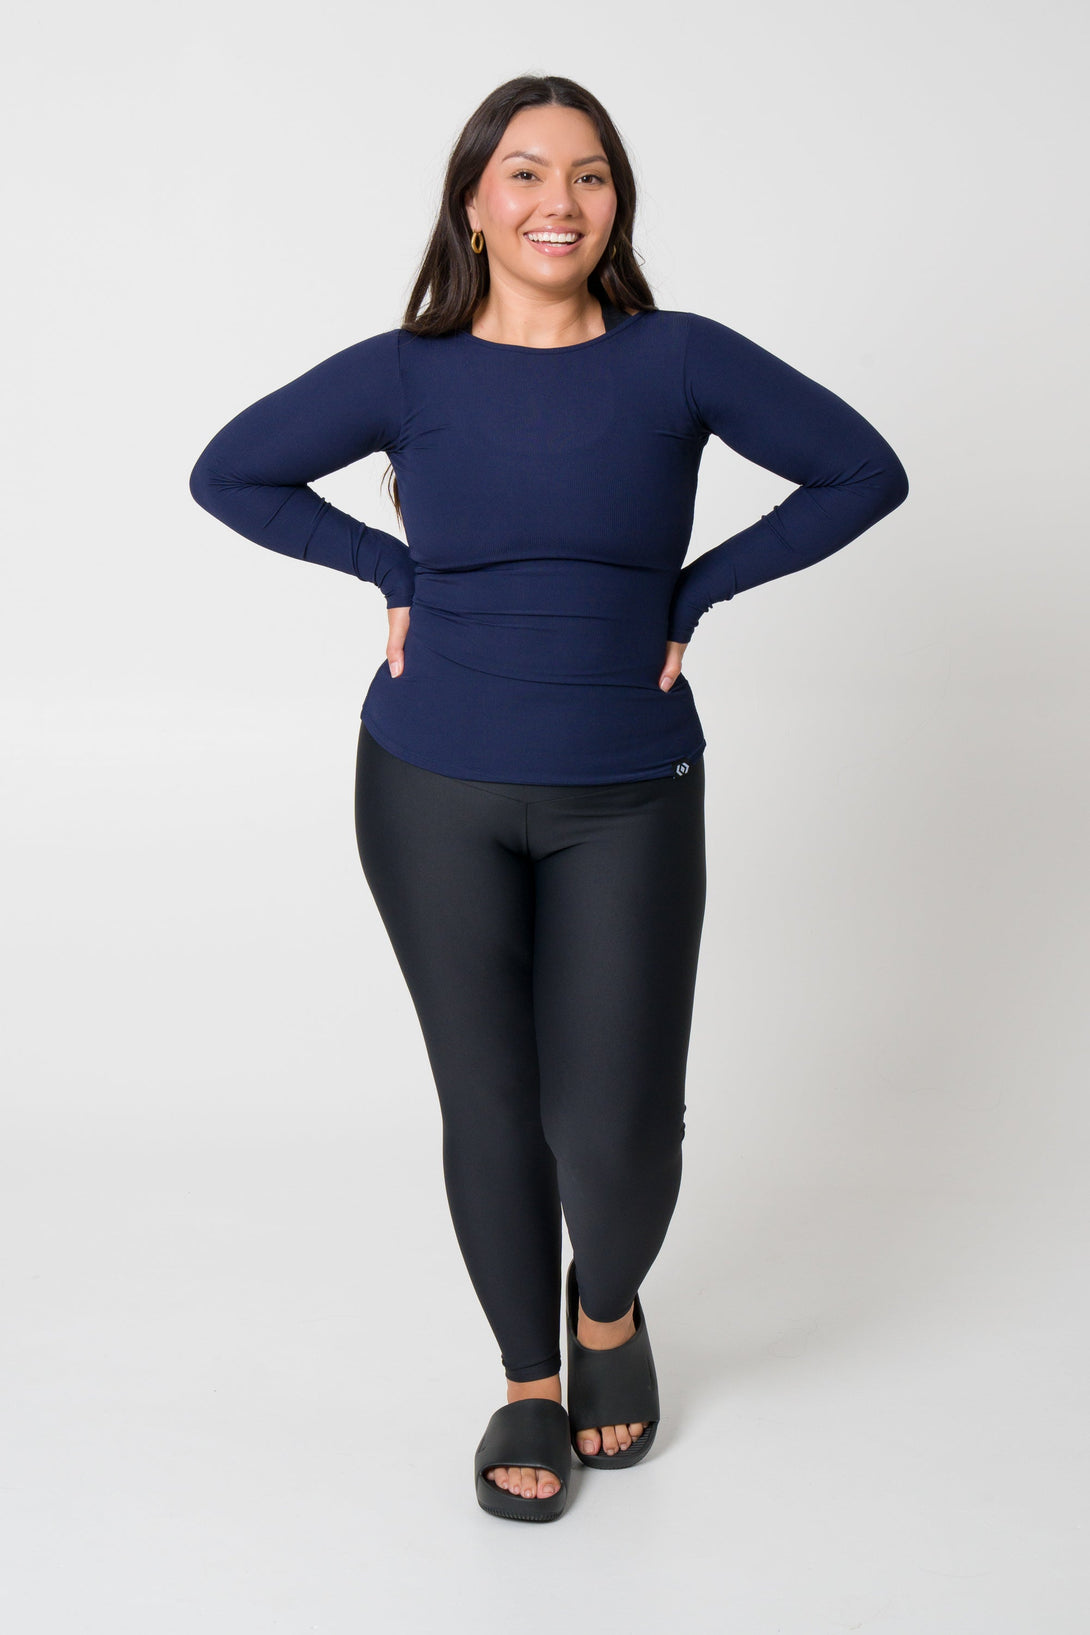 Navy Rib Knit - Fitted Long Sleeve Tee-Activewear-Exoticathletica